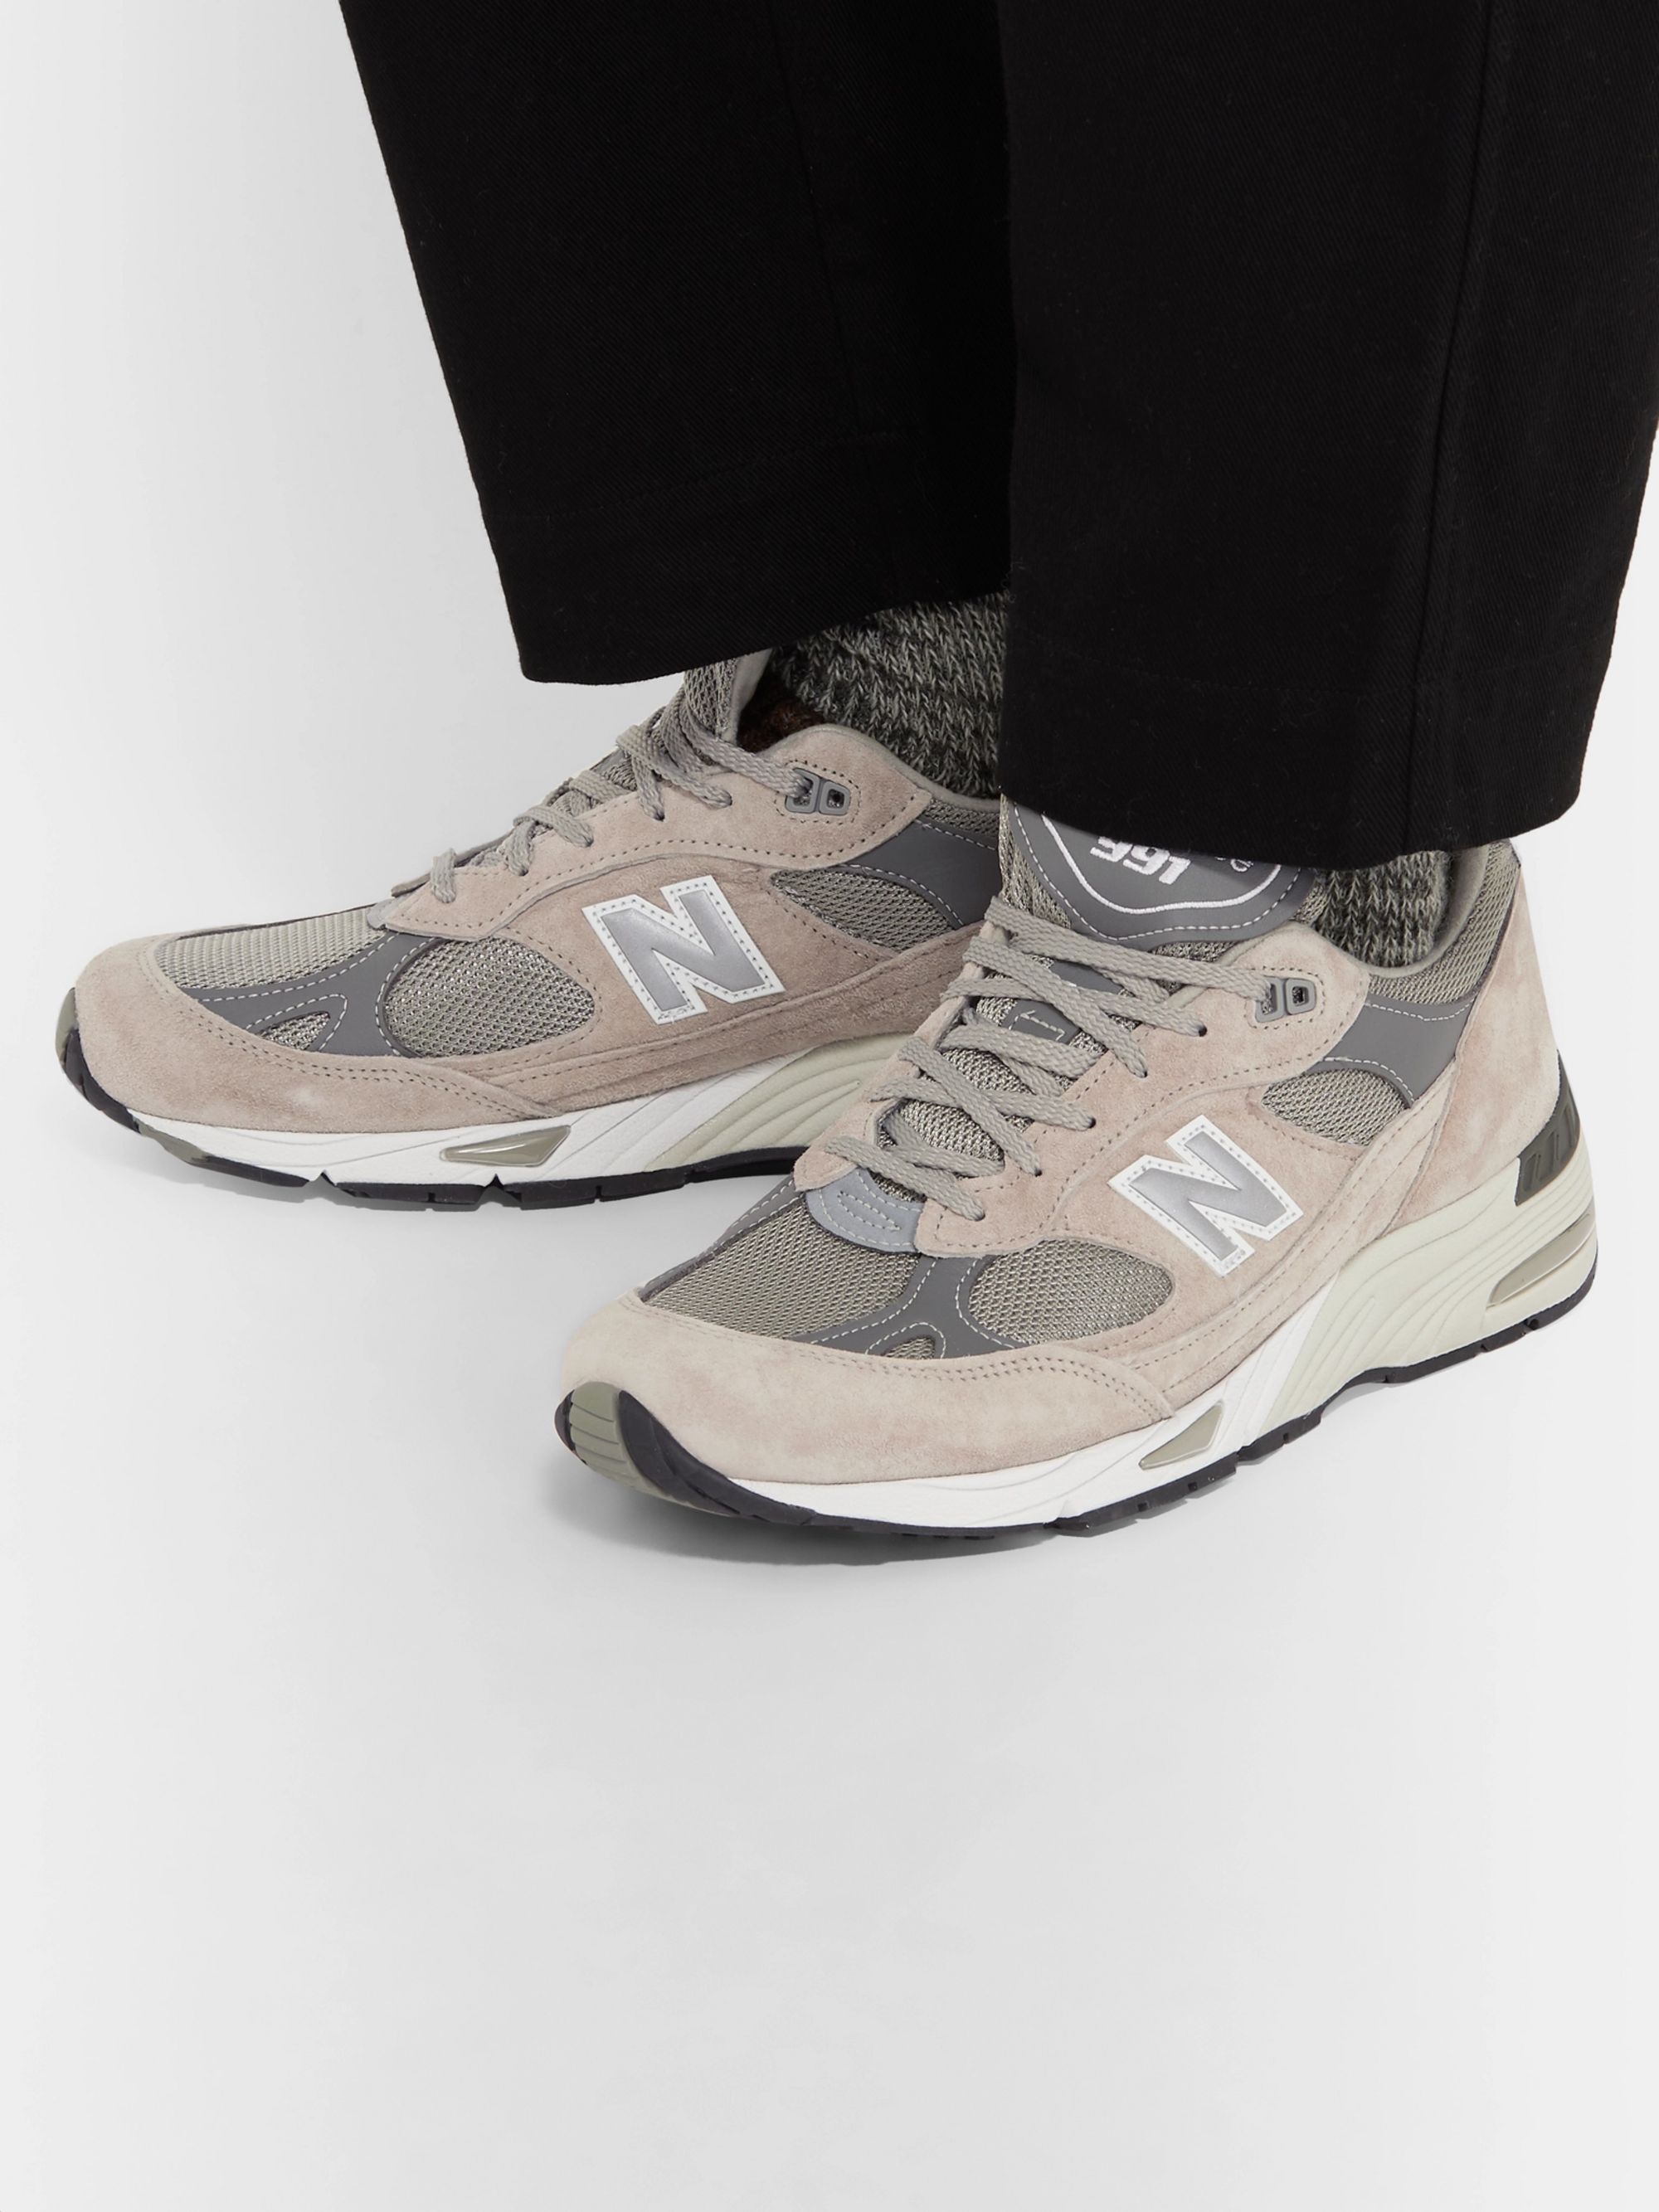 991 Suede, Mesh and Leather Sneakers